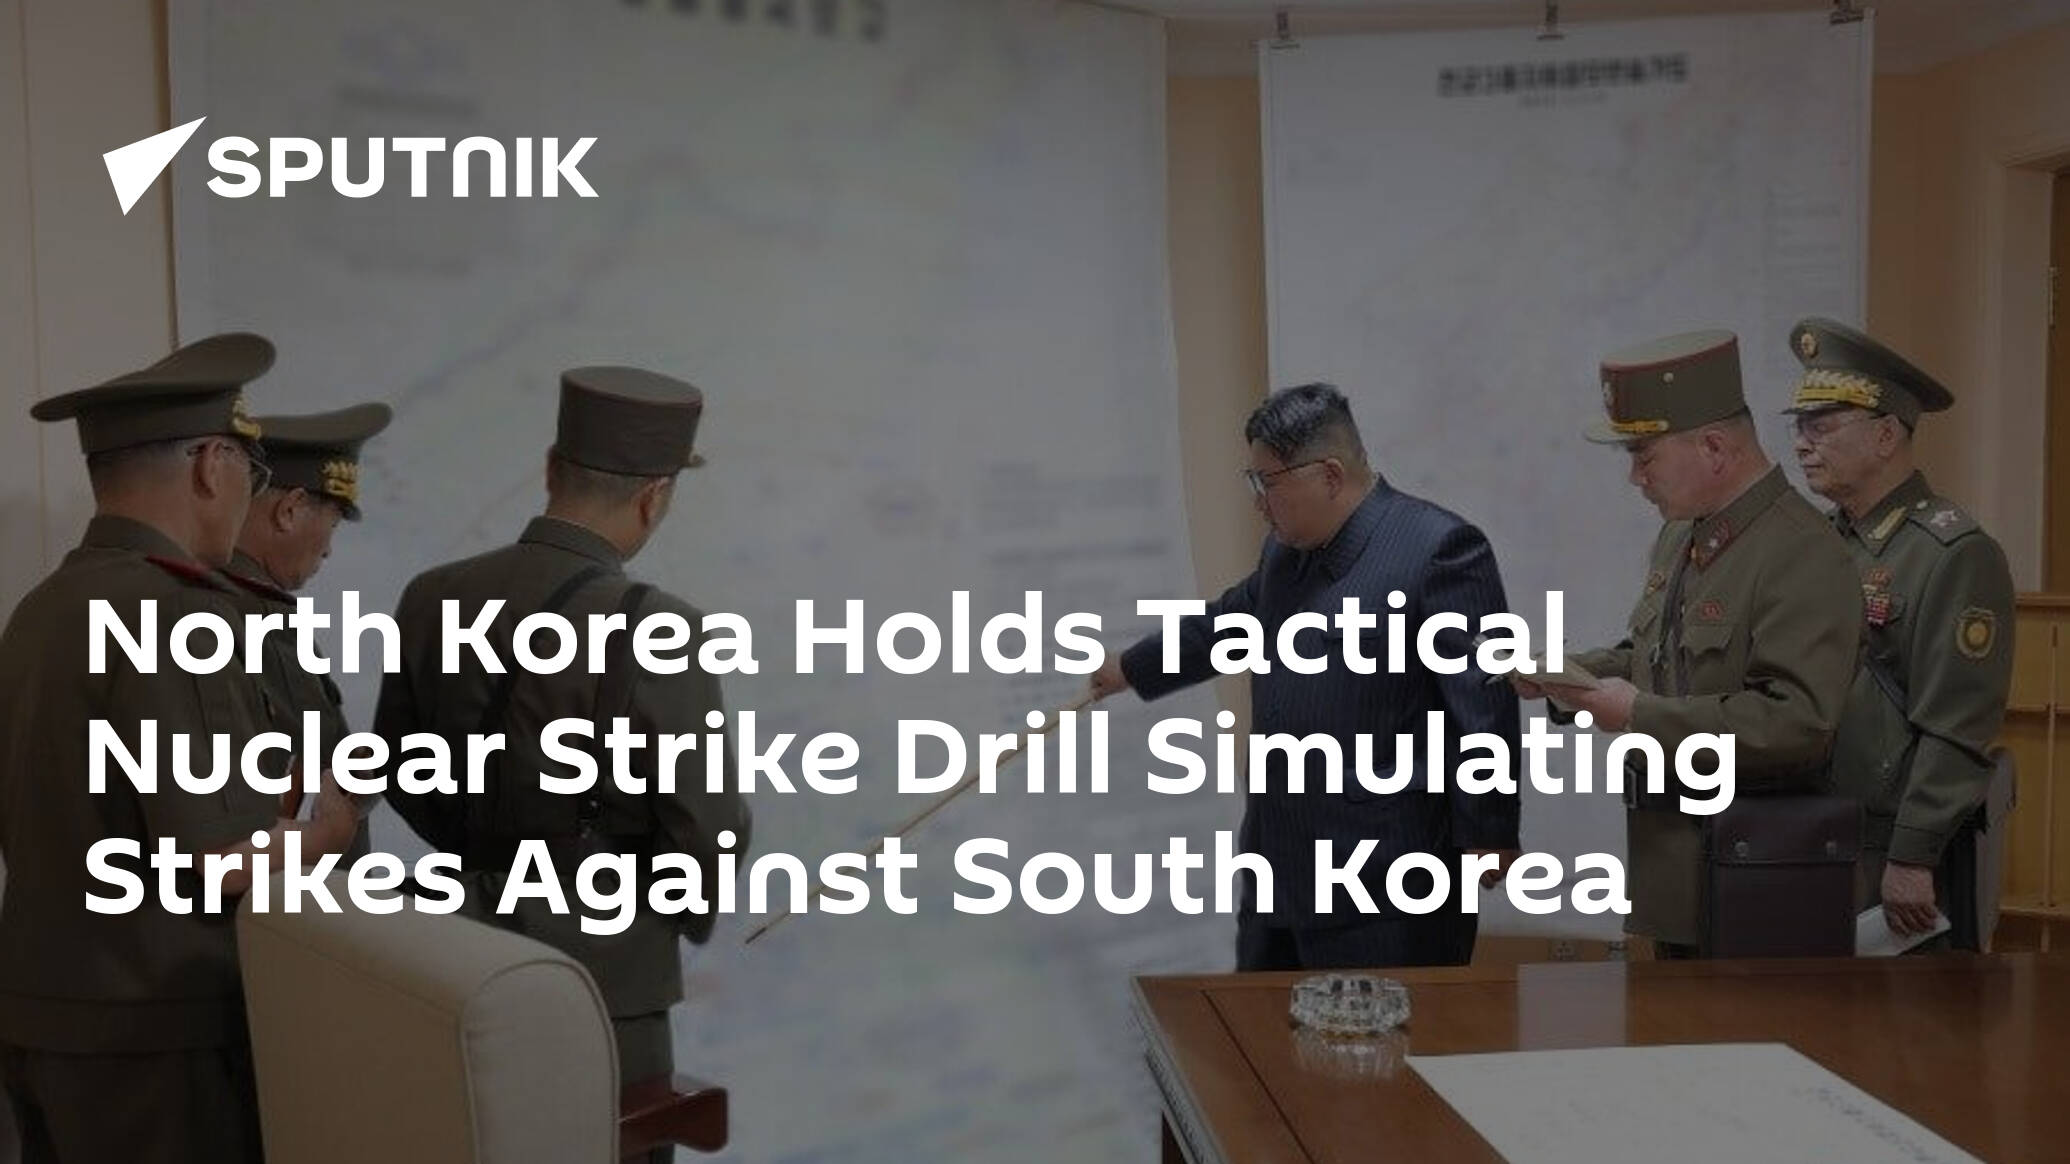 North Korea Holds Tactical Nuclear Strike Drill Simulating Strikes Against South Korea